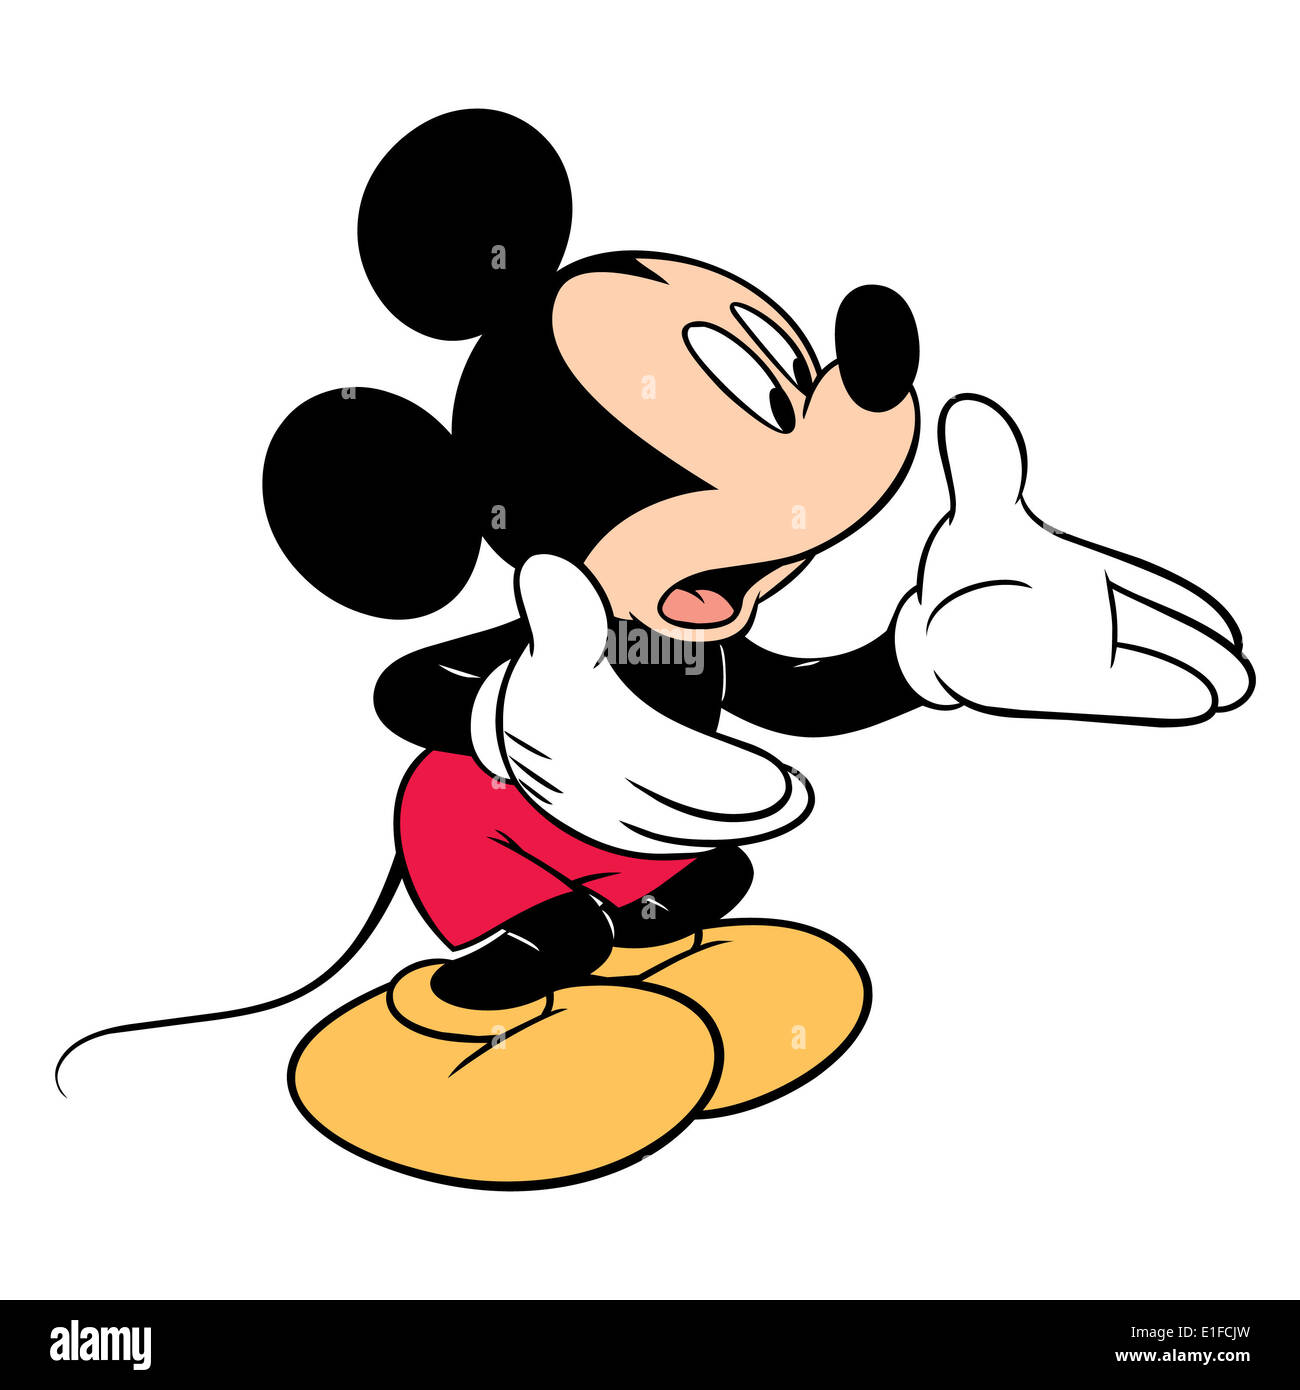 Mickey Mouse Stock Photo